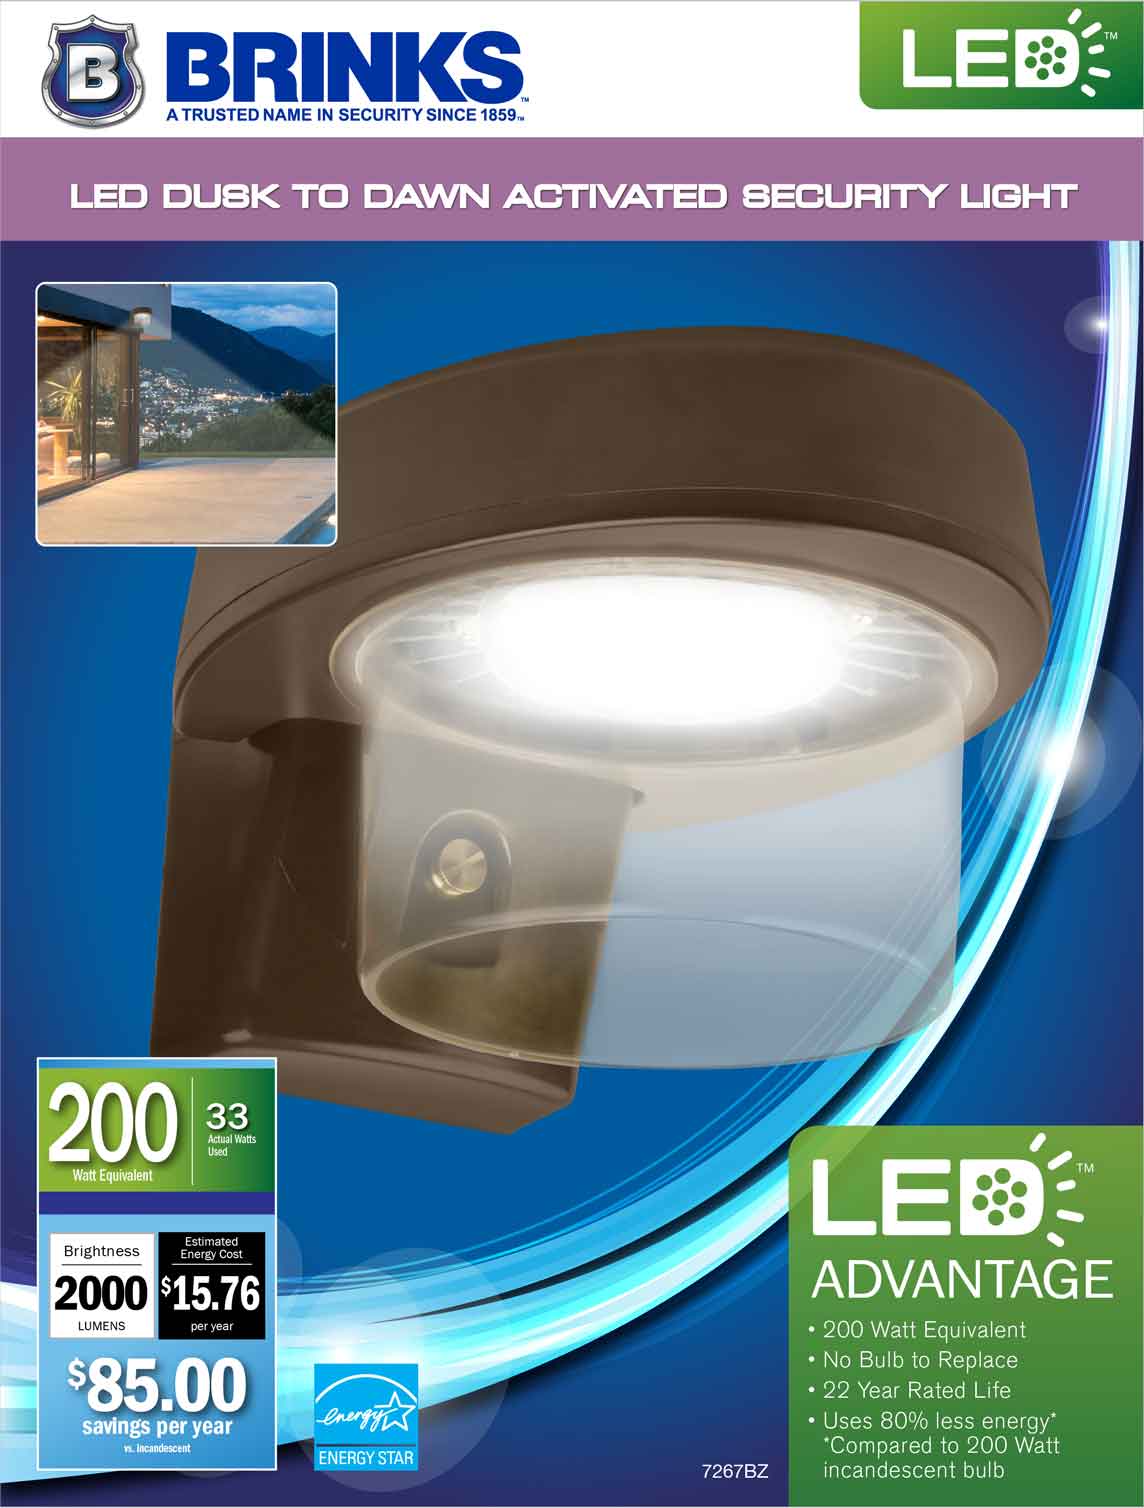 Brink's LED Dusk to Dawn Motion-Activated Security Light, Bronze Finish - image 2 of 2